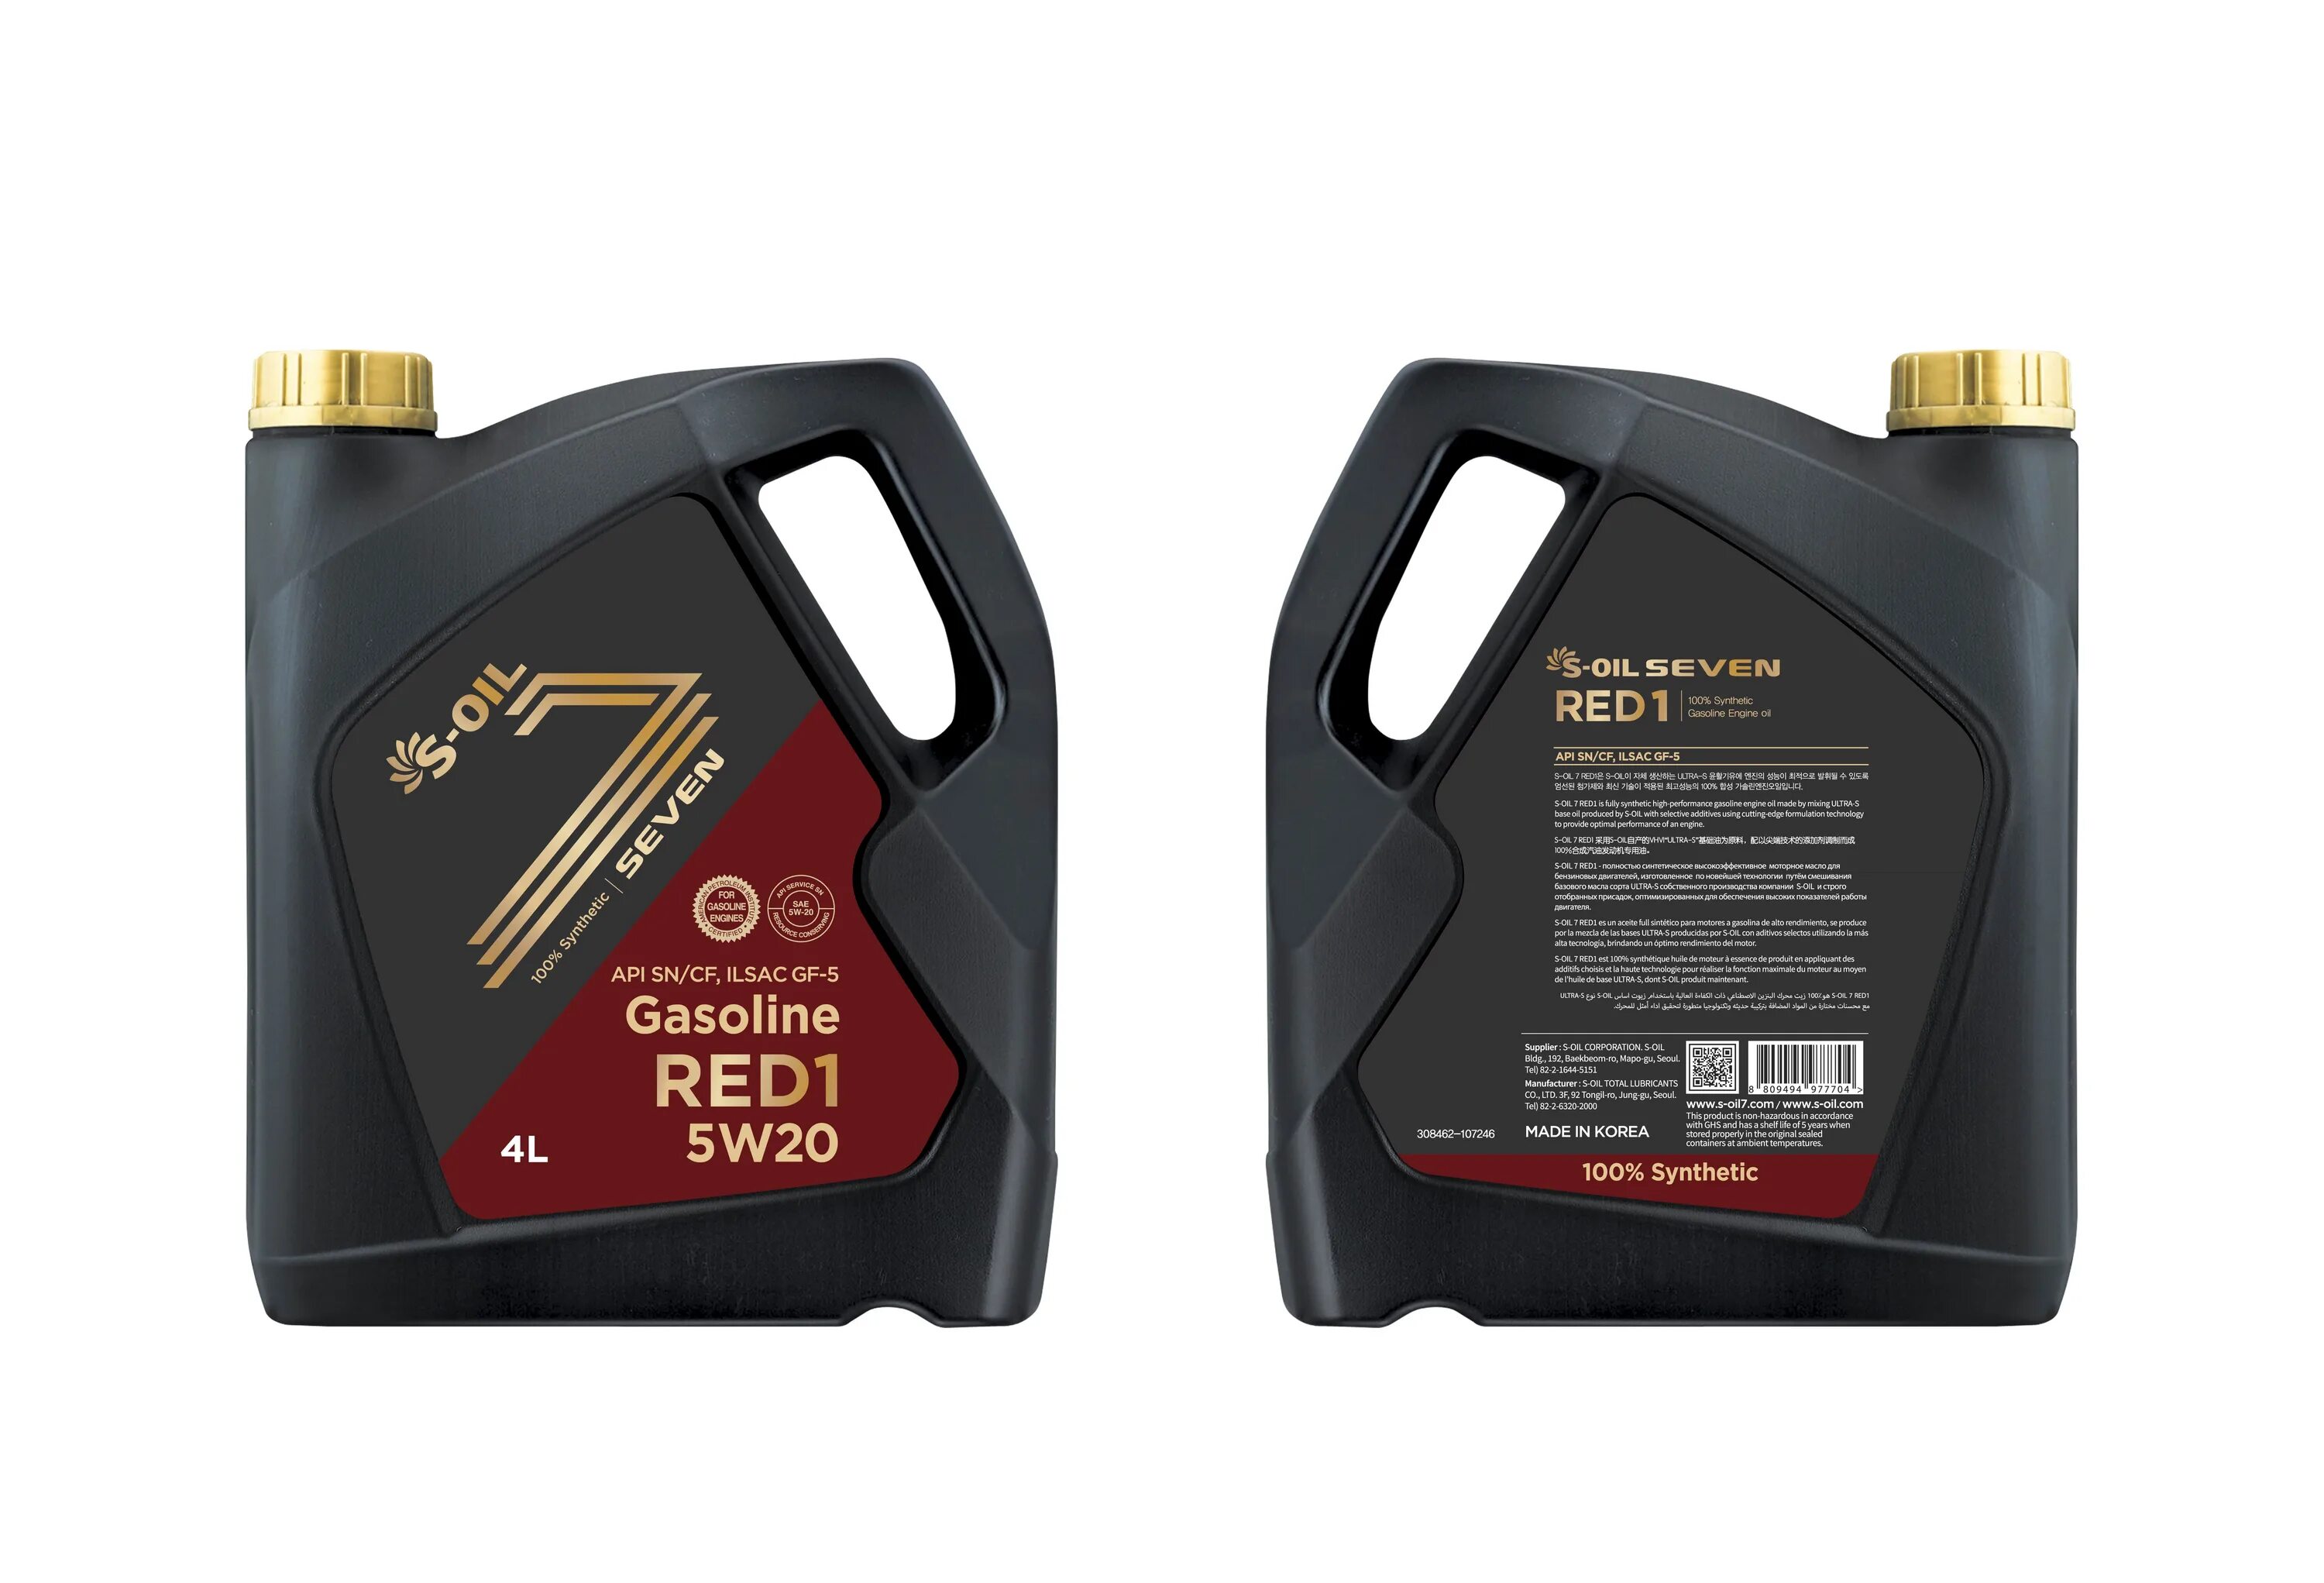 Масло севен. S-Oil 7 red1 5w-30 артикул. S-Oil 7 Red 1 5w40 4л. Масло Seven Red 5w30. S Oil 7 Red 5w30.